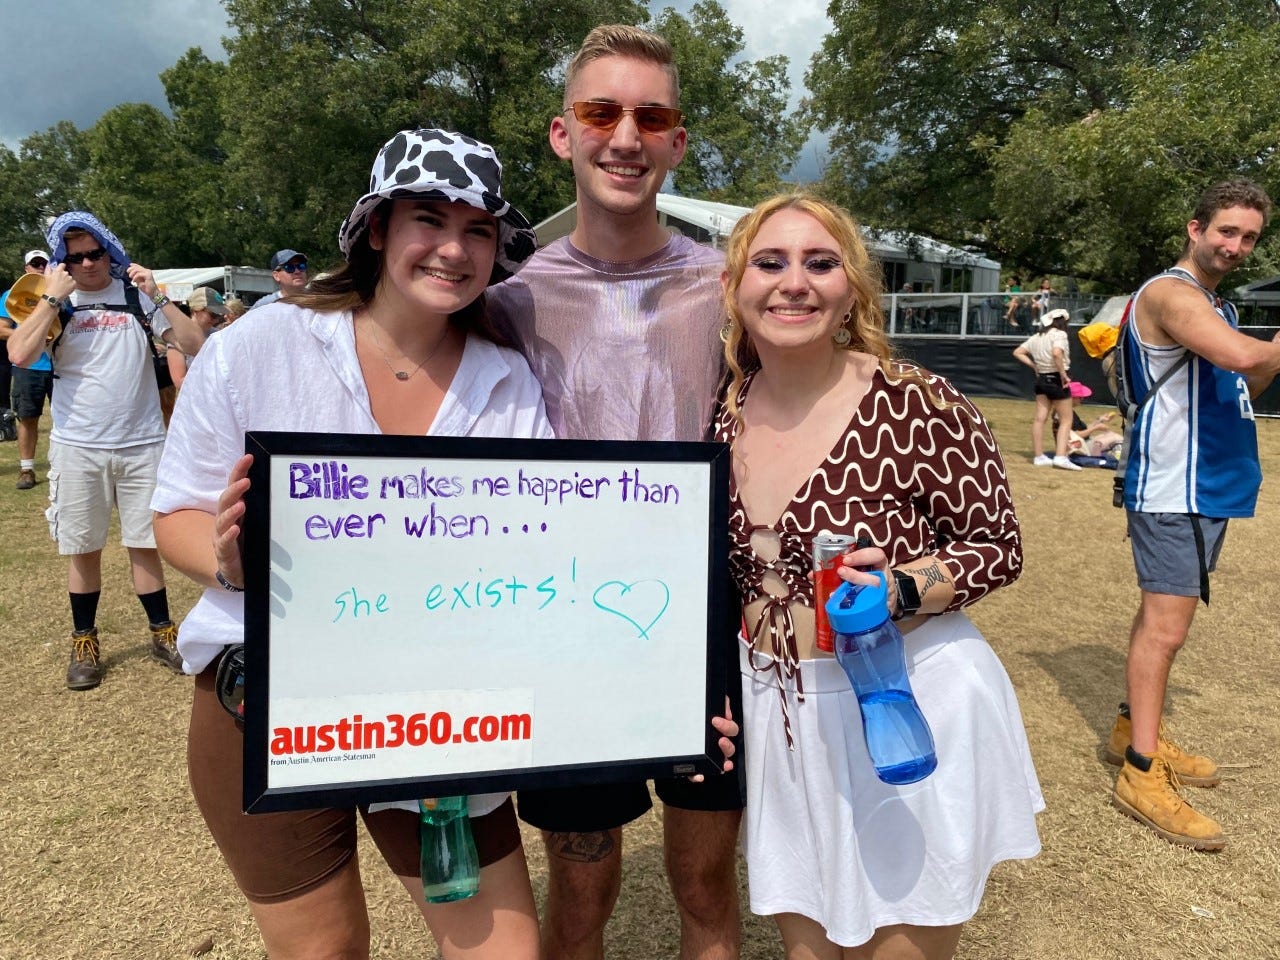 Rayann Vasquez, 20, left, Andrew Carrico, 20, middle, and Gabrielle Harris, 21, waiting for the Billie Eilish show on Saturday Oct. 2, 2021. All three are from Lubbock, Texas.